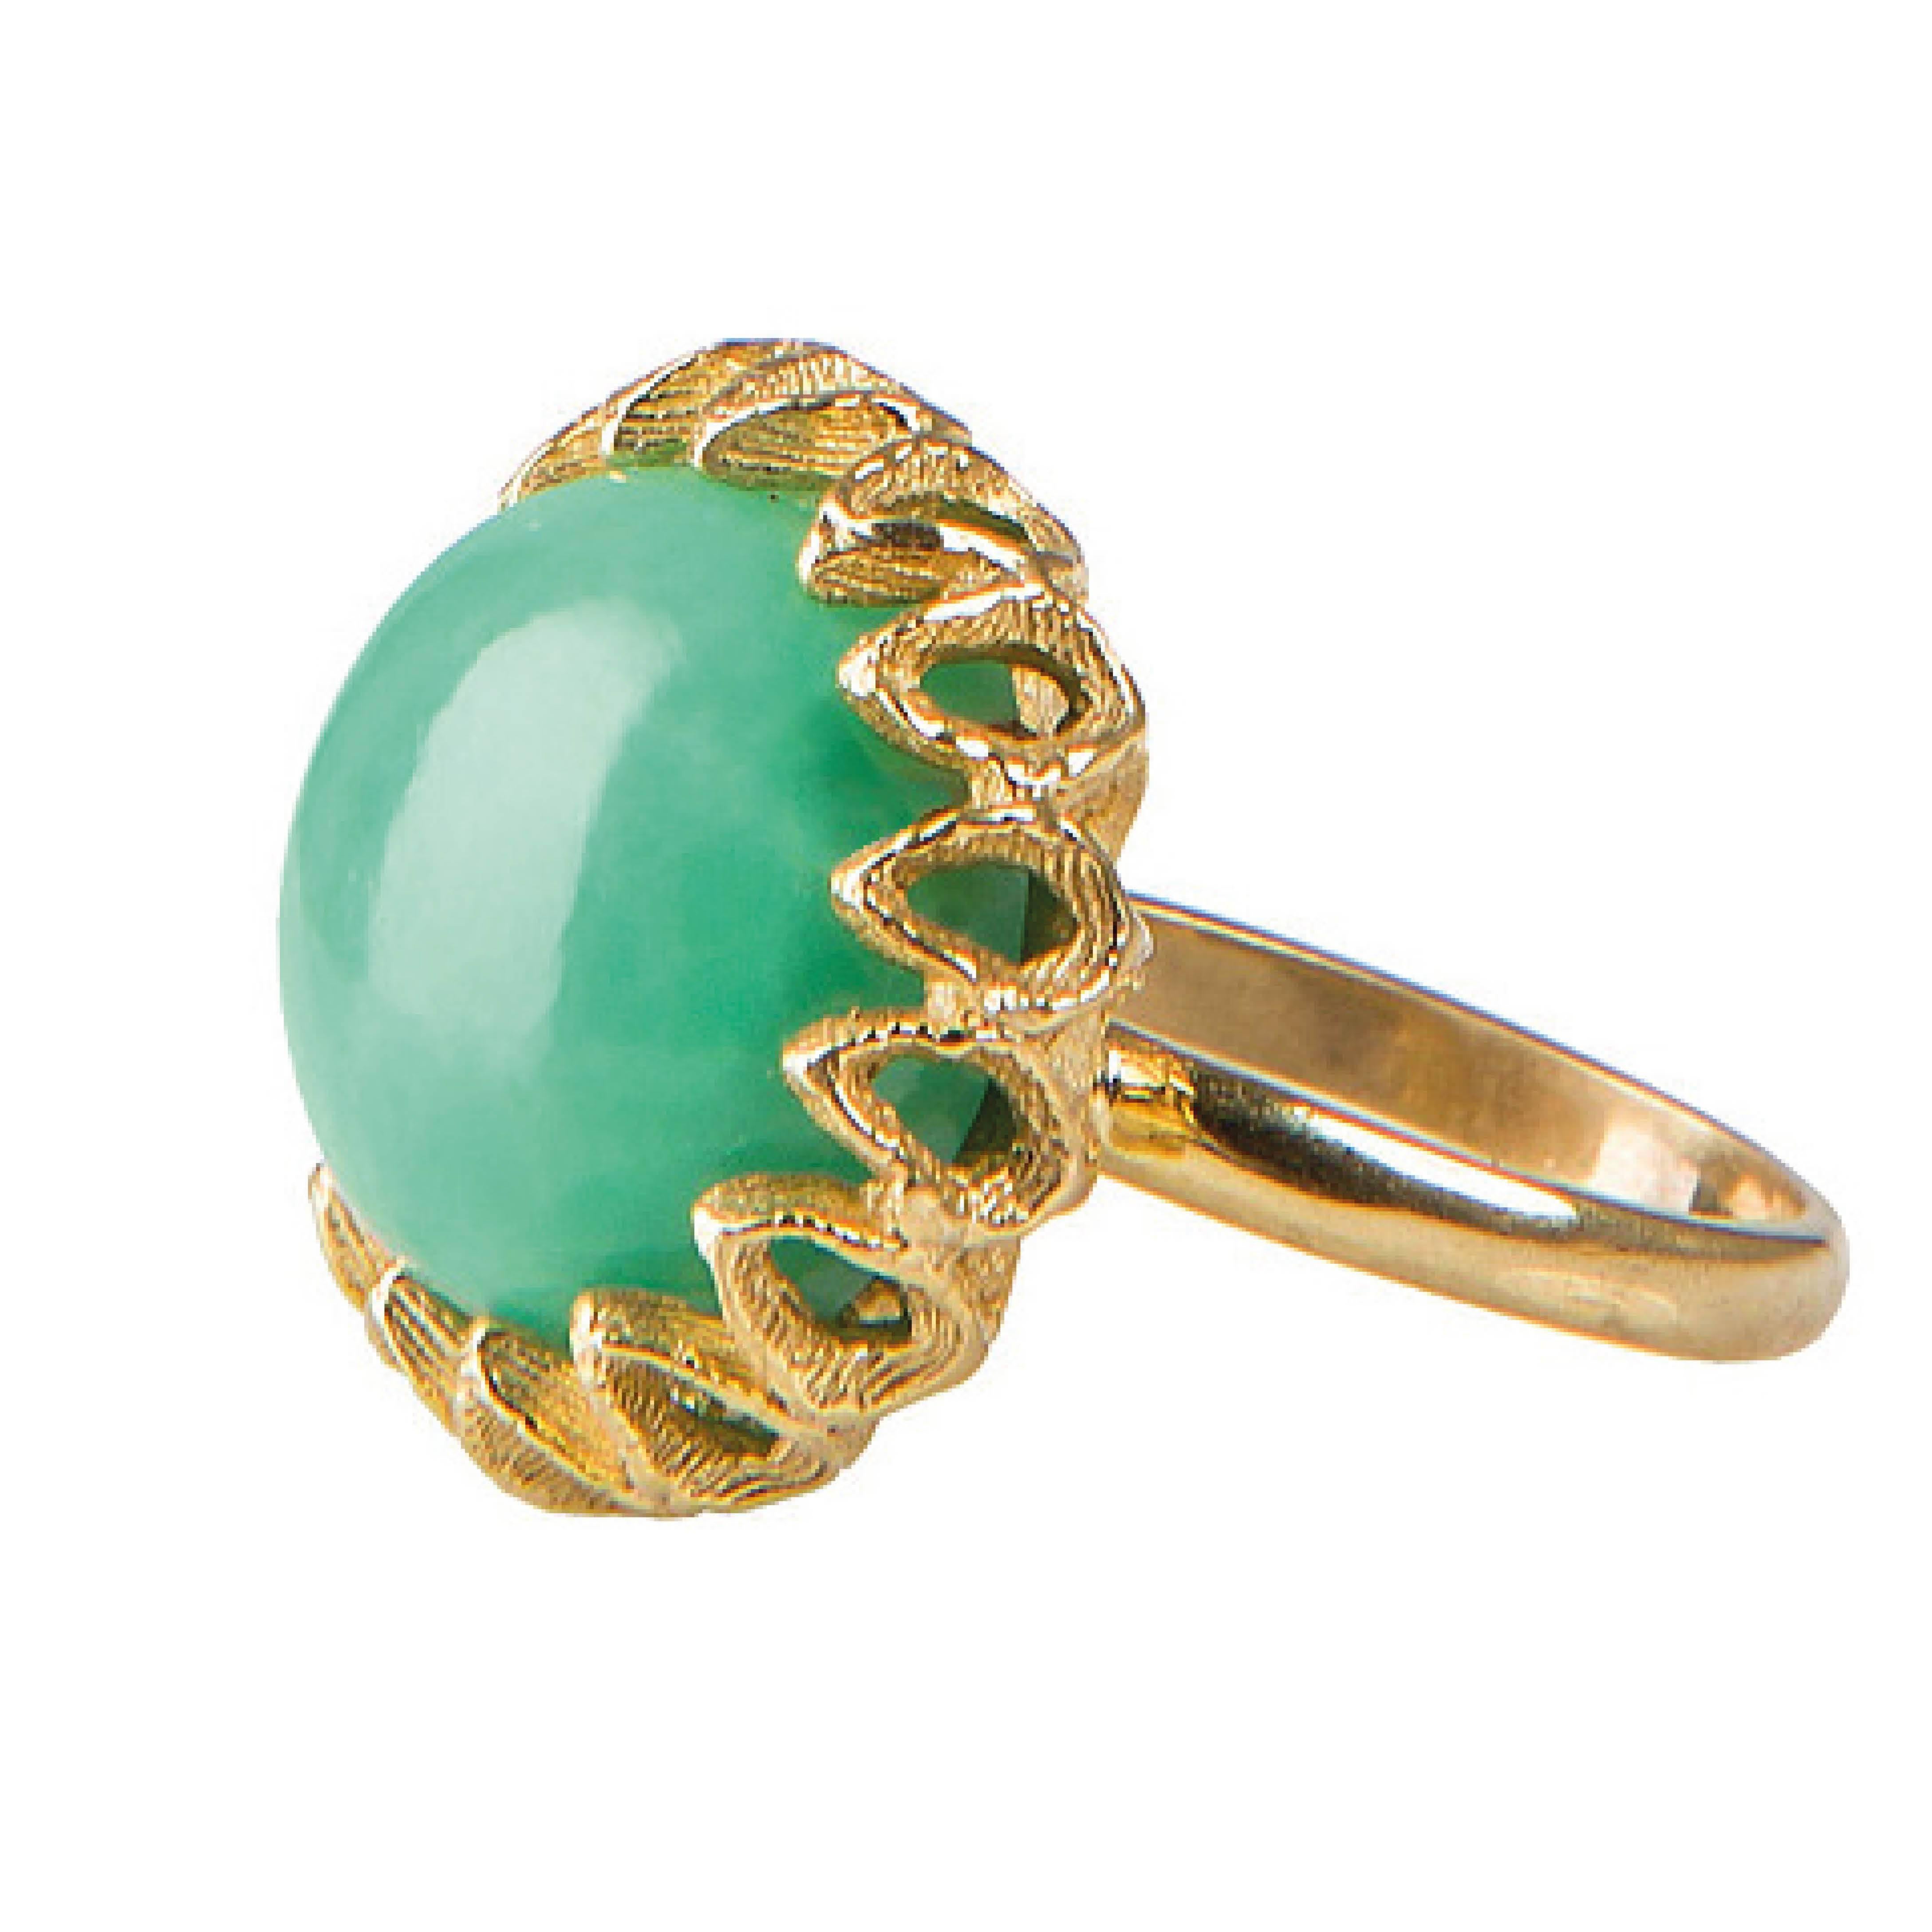 The finest 16-carat chrysoprase gemstone set in a handmade 18kt gold plated band. This beautiful stone is sourced from ethical mines in Namibia, Africa; set and finished by hand in England.

US size 6 1/2 / UK size N. This unique piece is